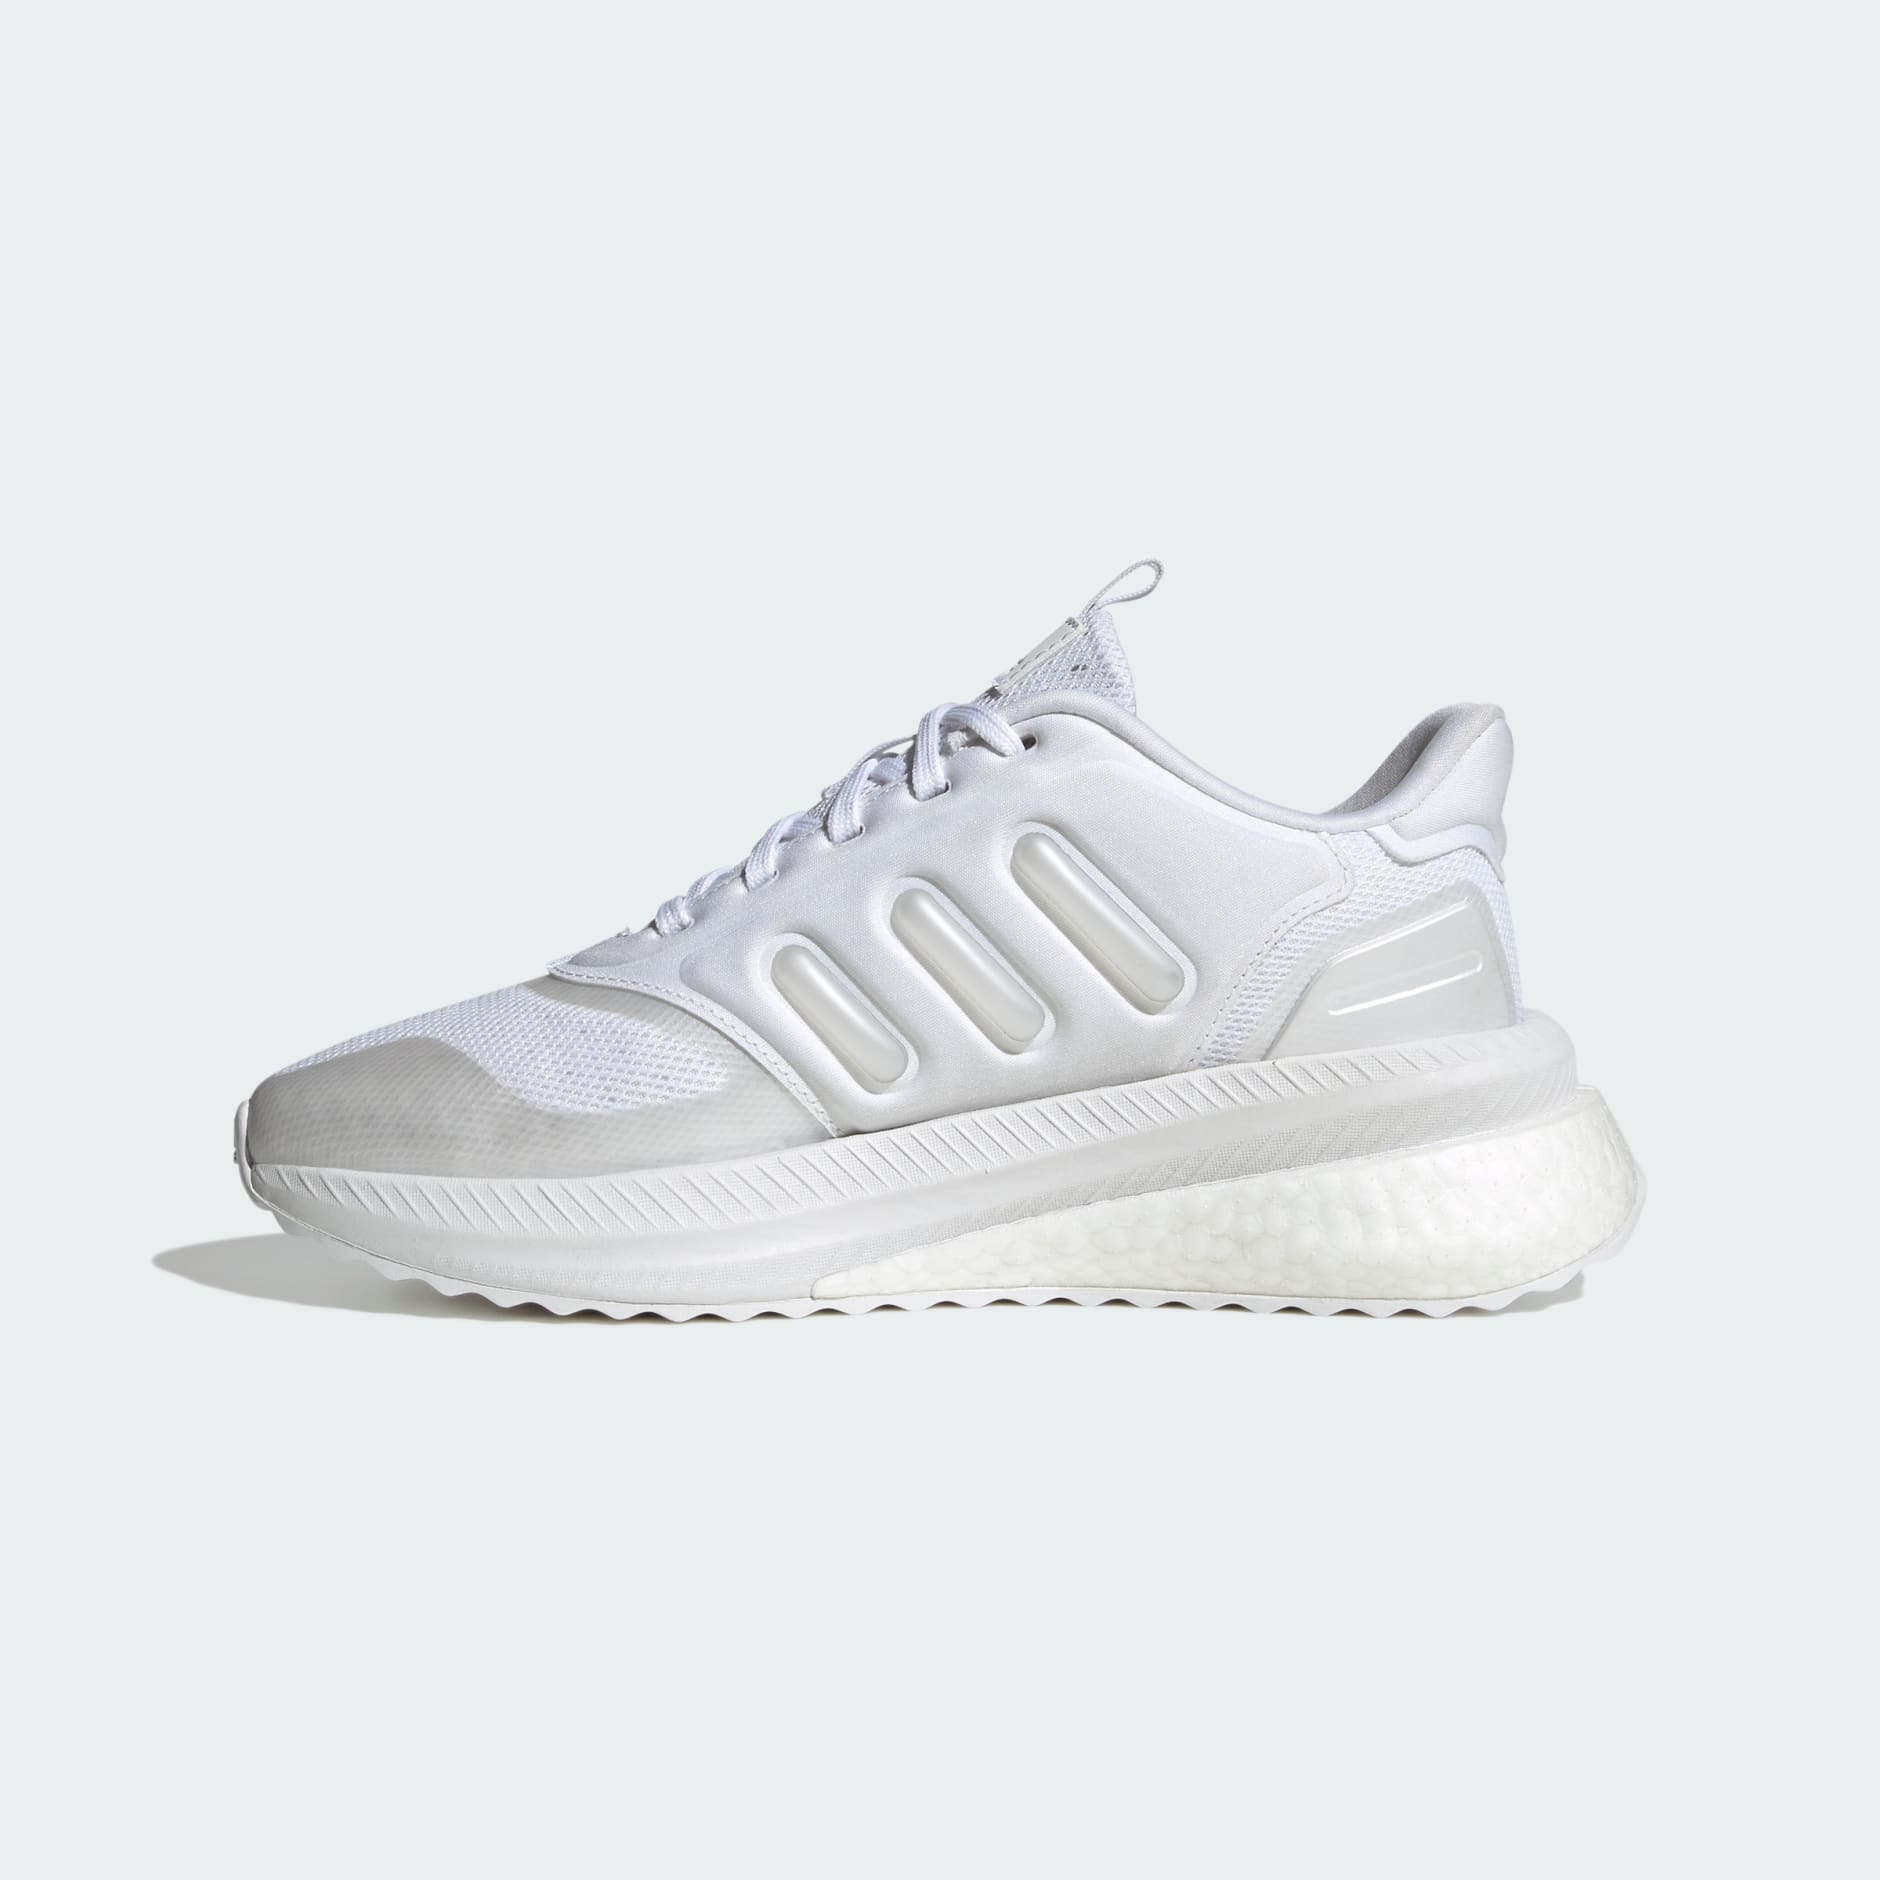 Shoes - X_PLRPHASE Shoes - White | adidas South Africa